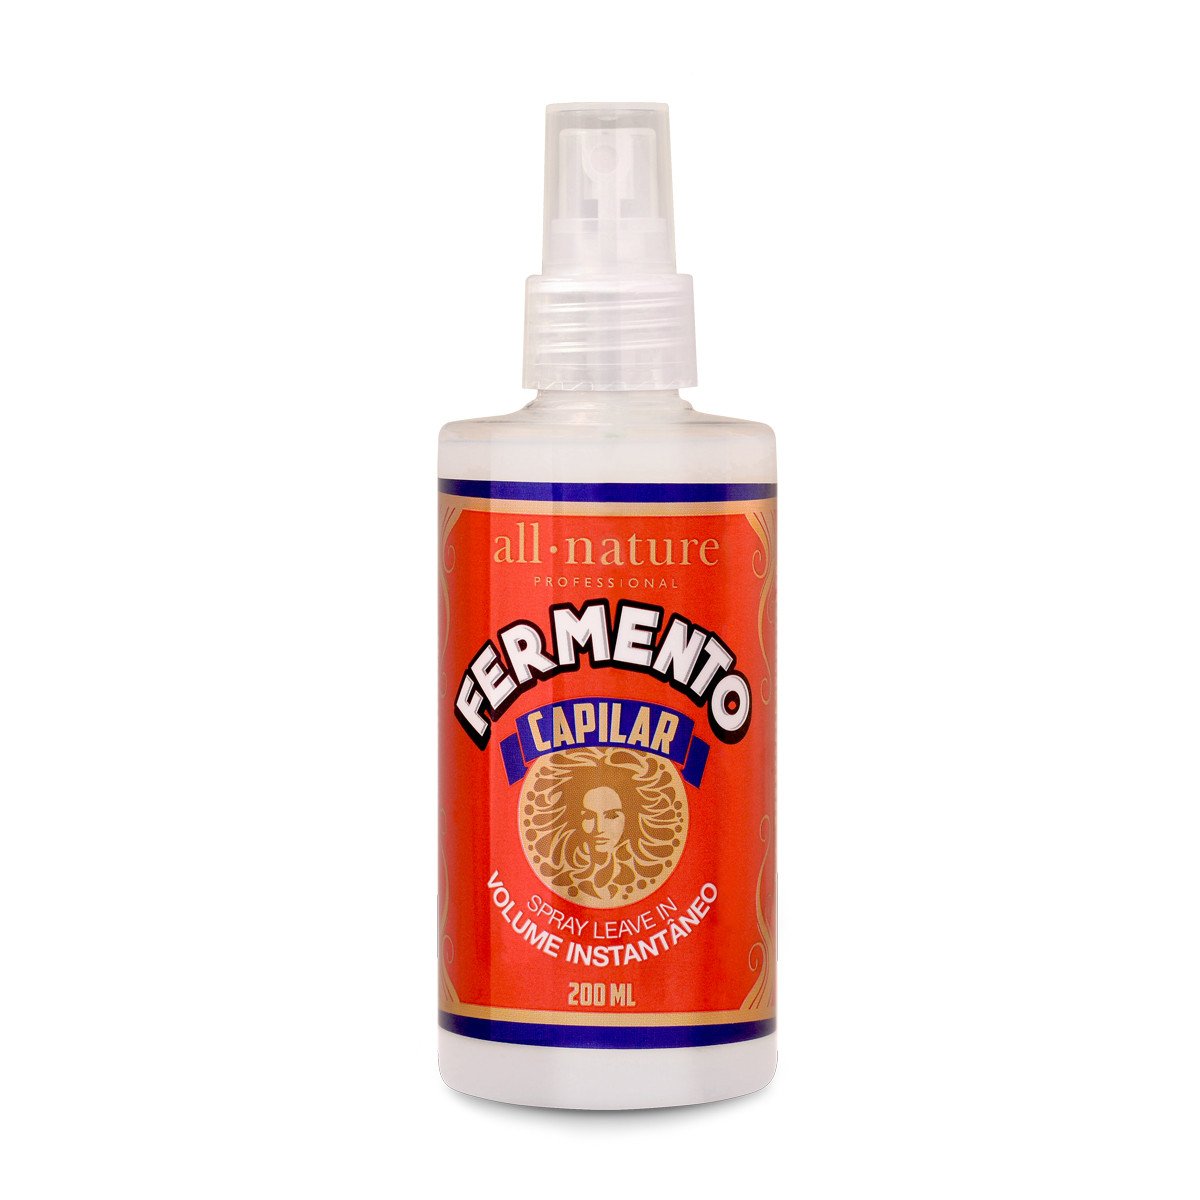 All Nature Home Care Fermento Instant Volume Spray Hair Yeast Leave-in Finisher 200ml - All Nature